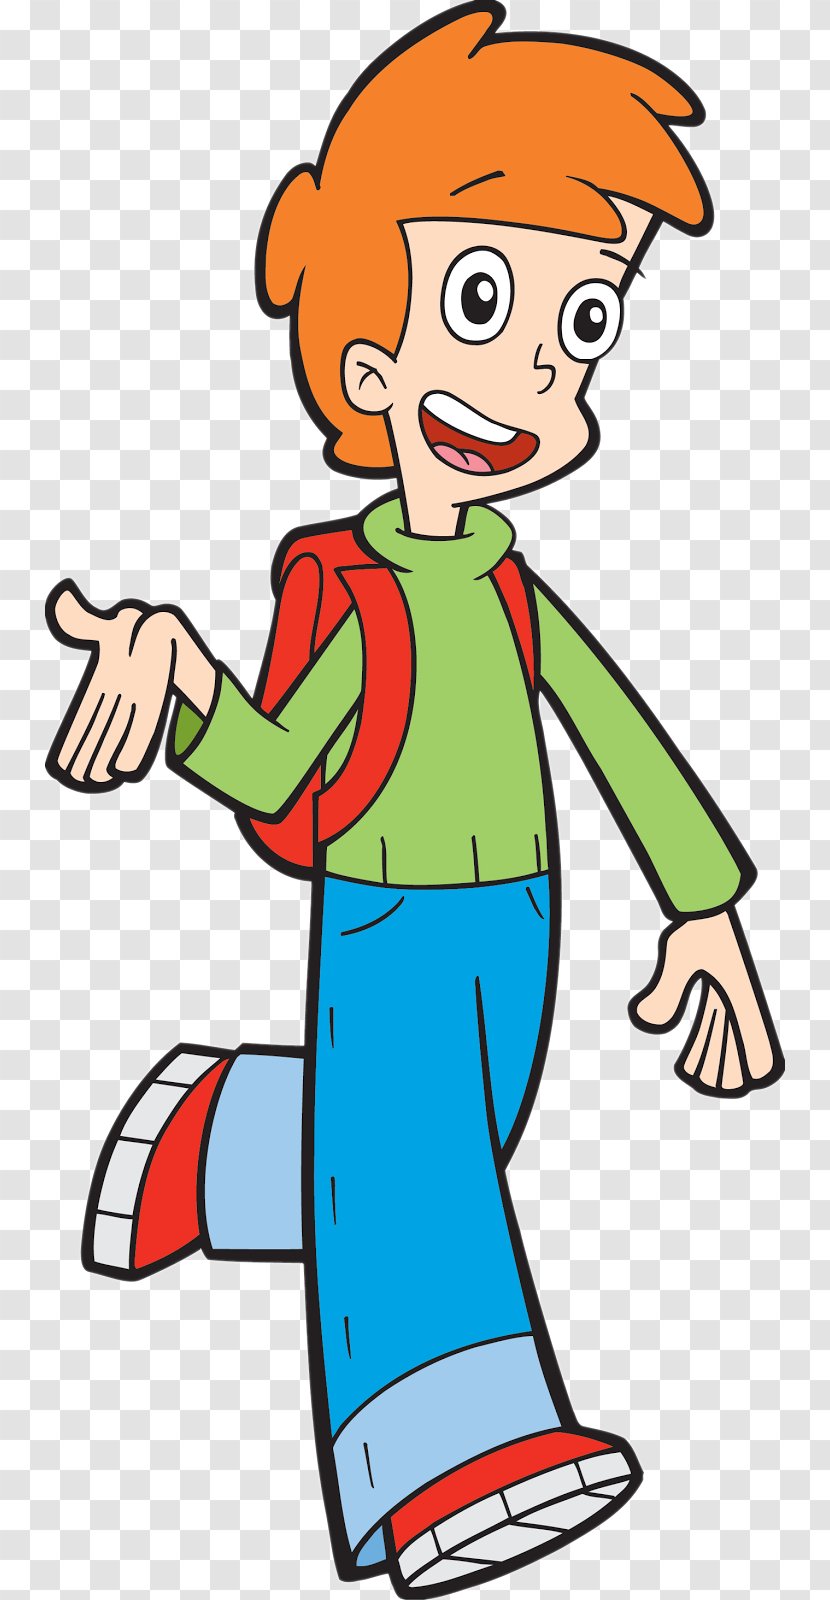 Character Animated Cartoon PBS Kids Television Show - Deviantart Transparent PNG